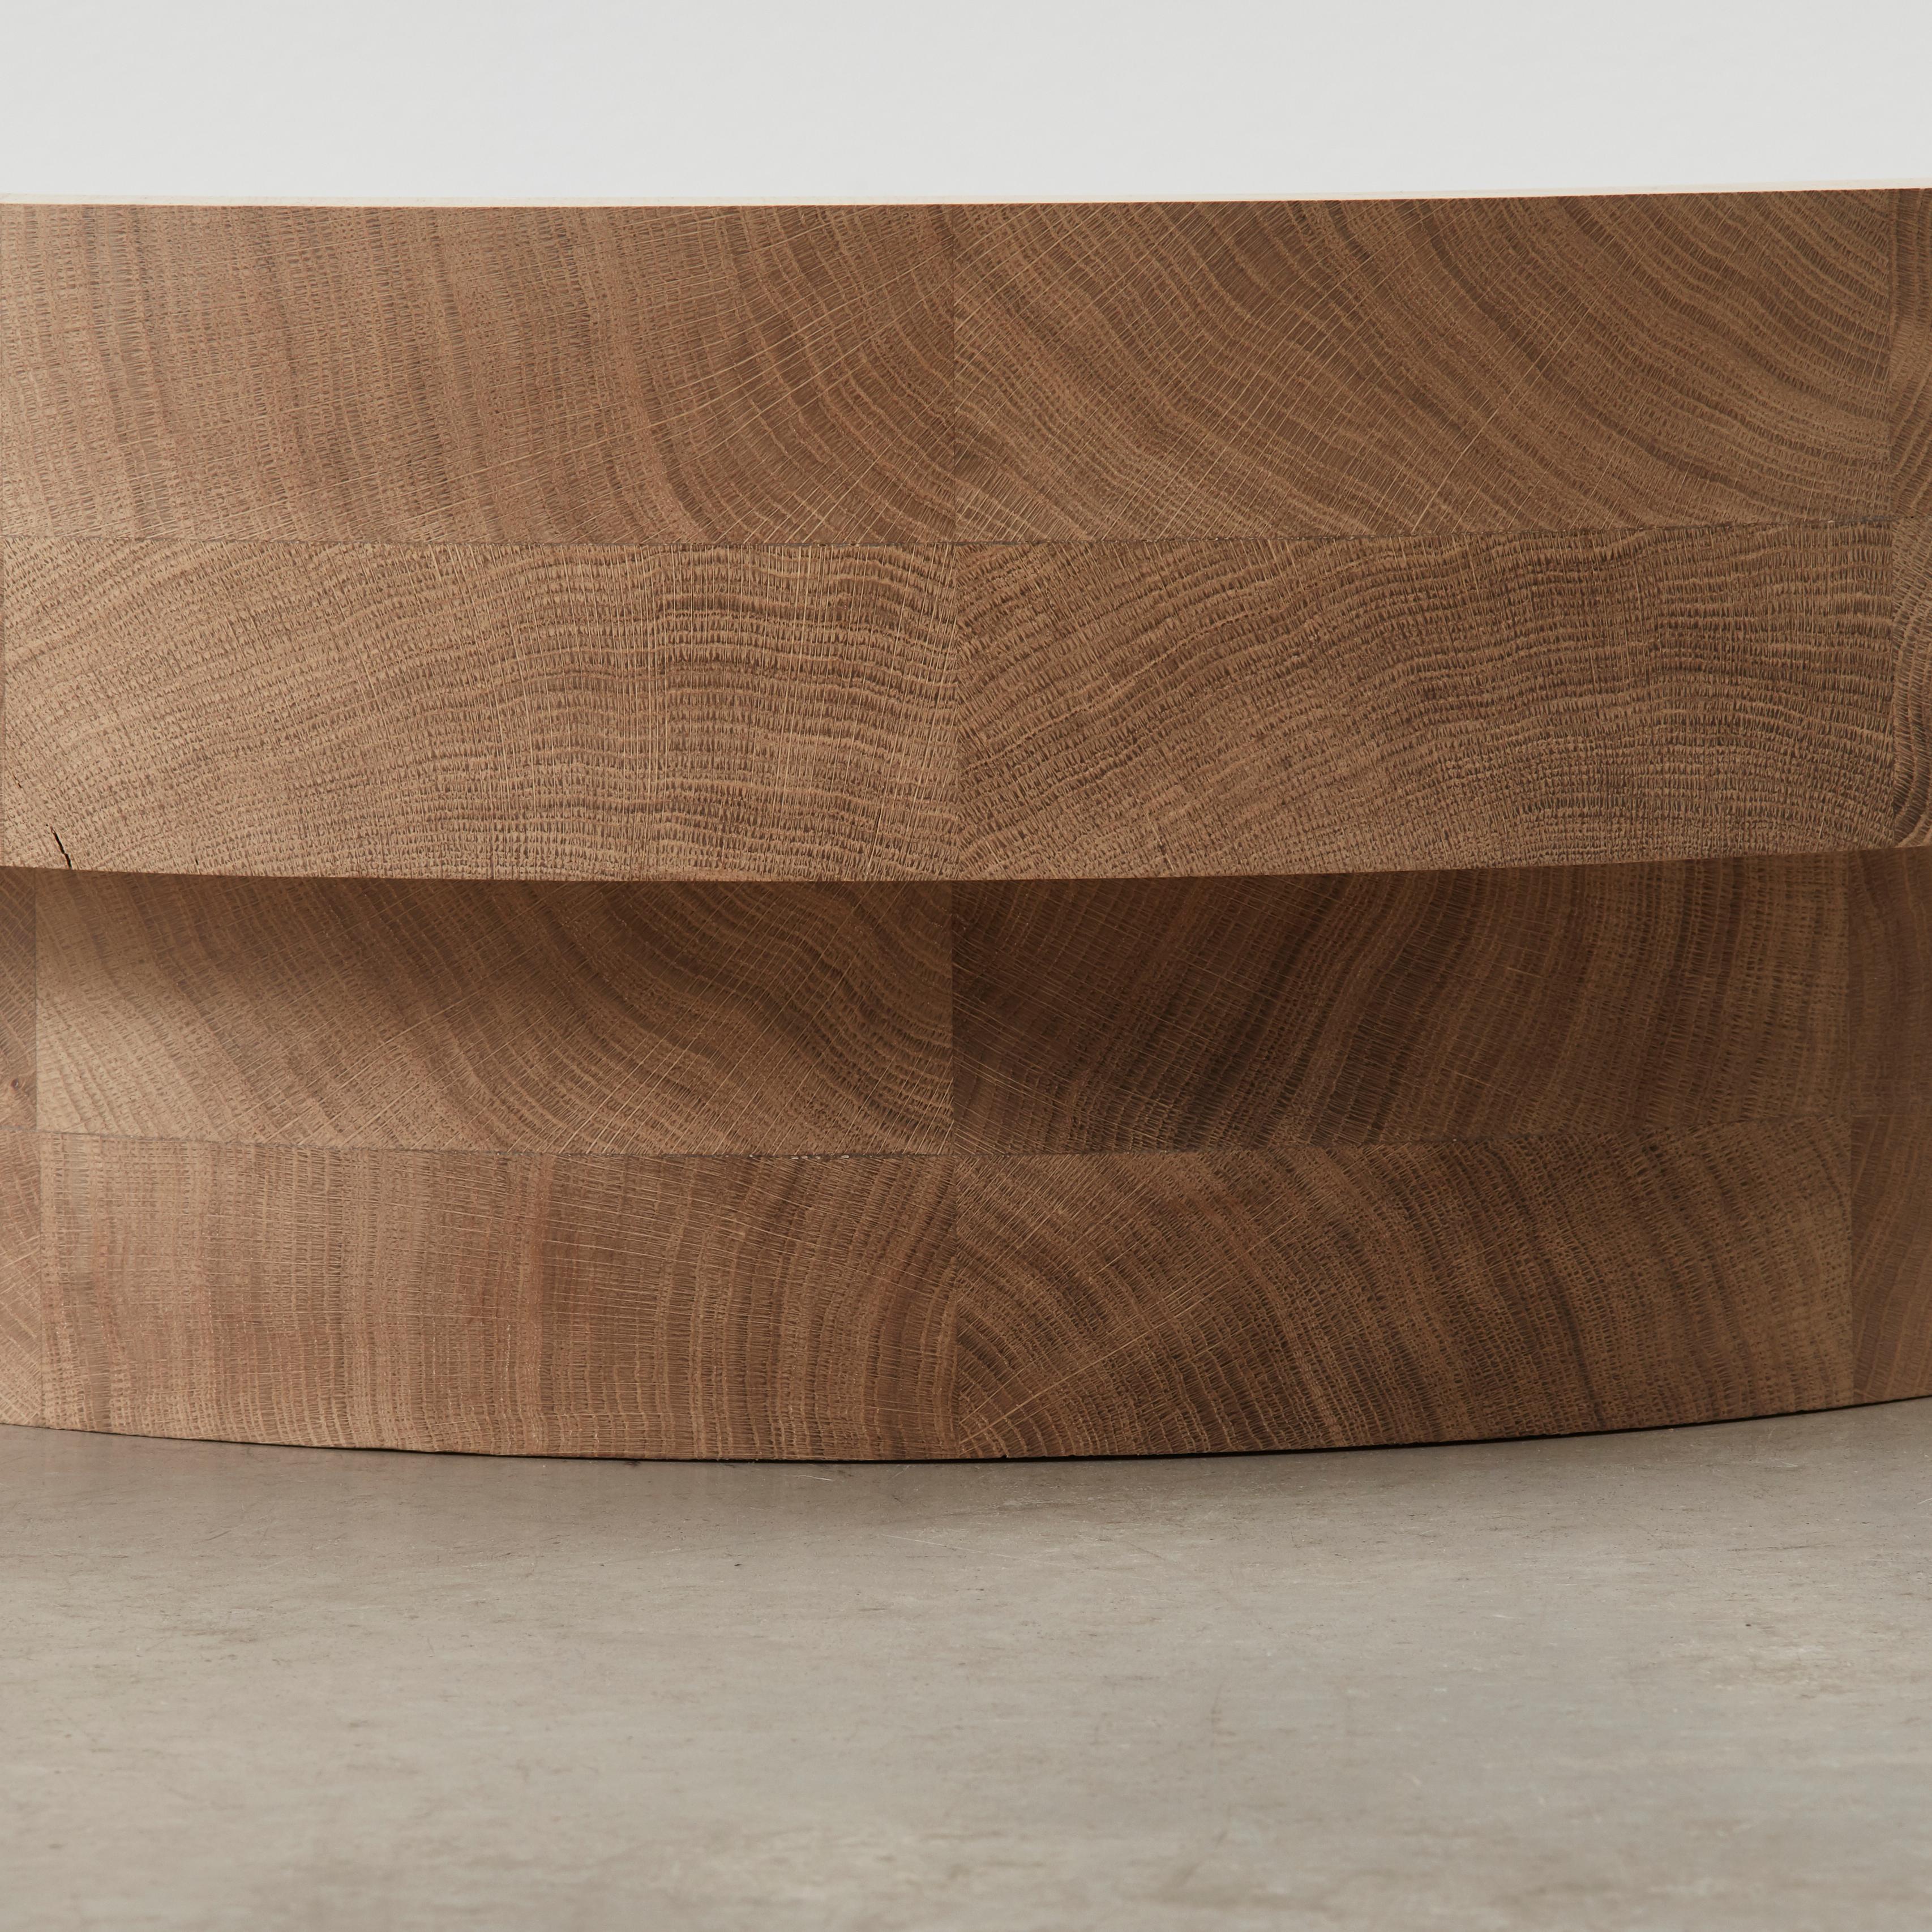 Contemporary Benni Allan 'Low Table Two' in oak by EBBA, UK, 2022 For Sale